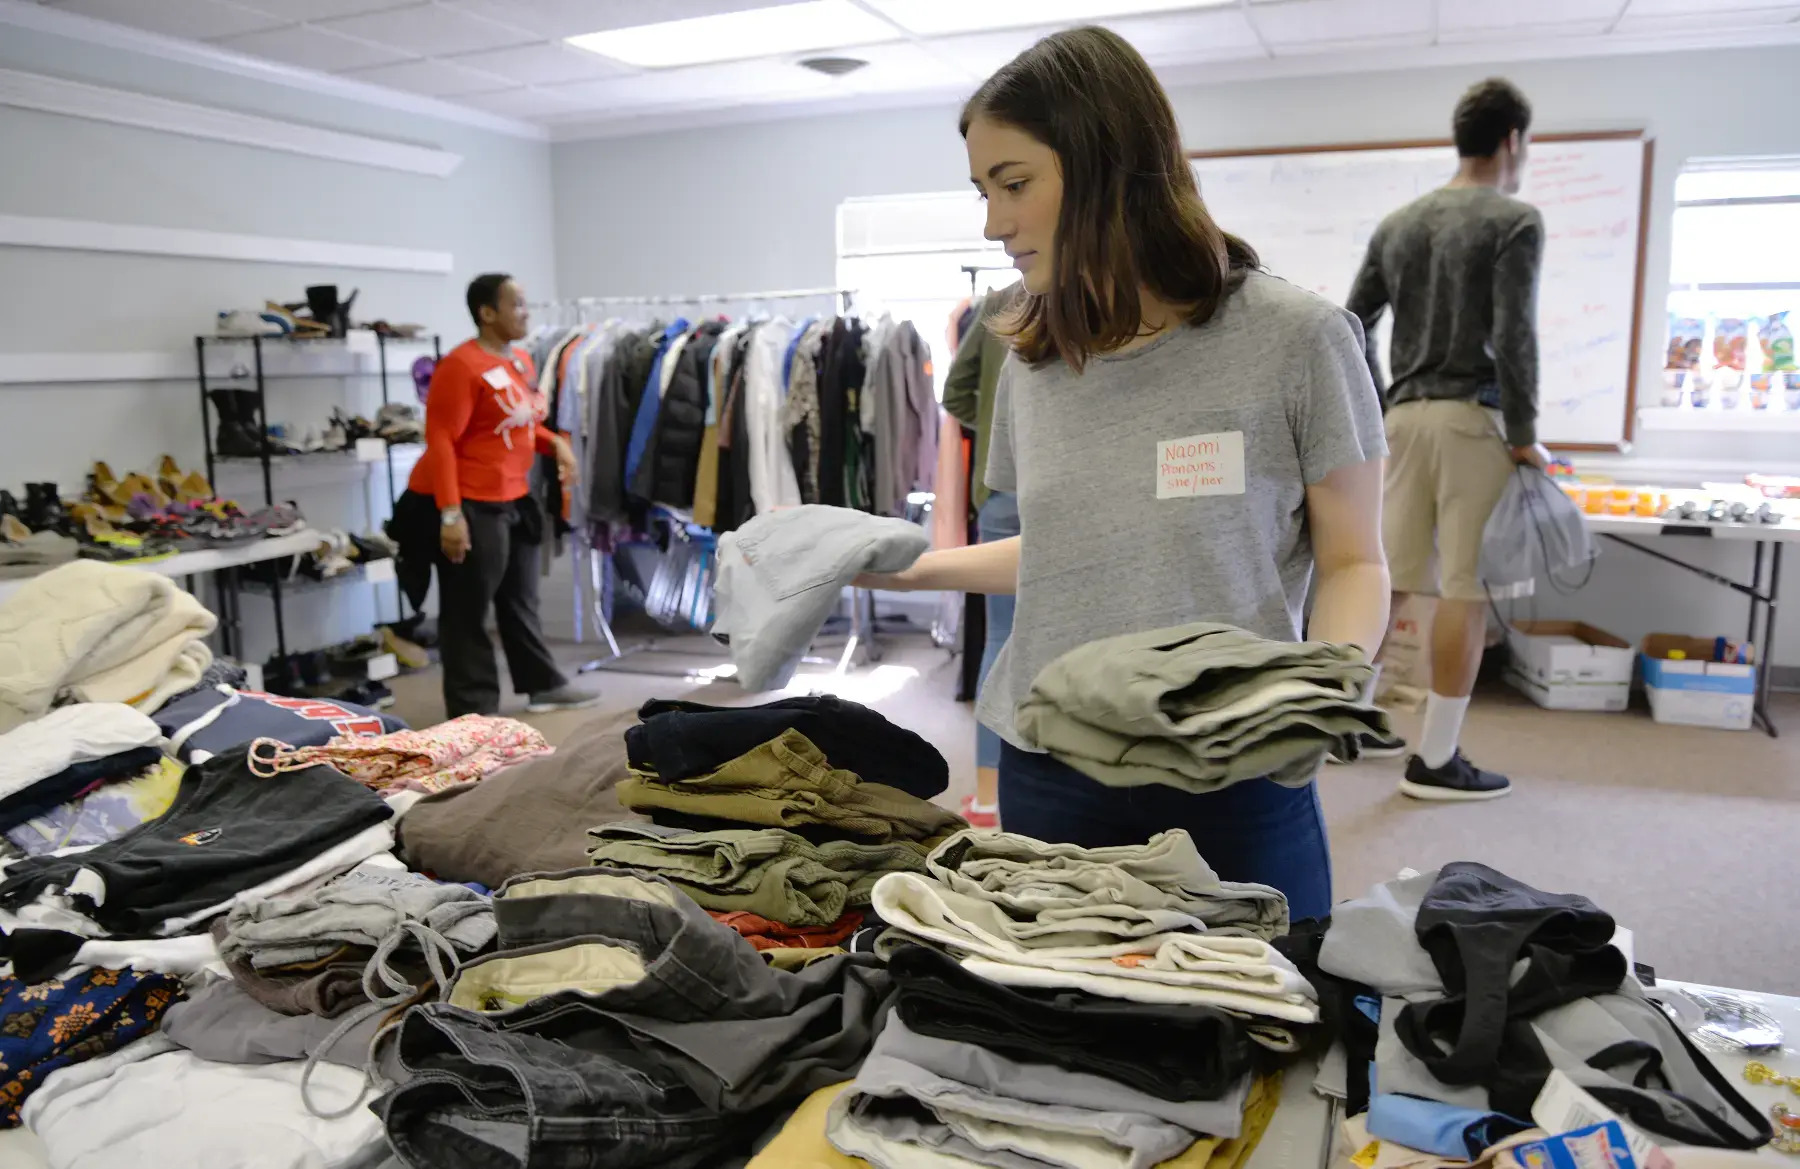 Naomi Sand, a University of Richmond student, volunteered at the pop-up drop-in center through UR's WILL* program, helping to sort and fold clothing donations for youth facing homelessness and unstable housing.